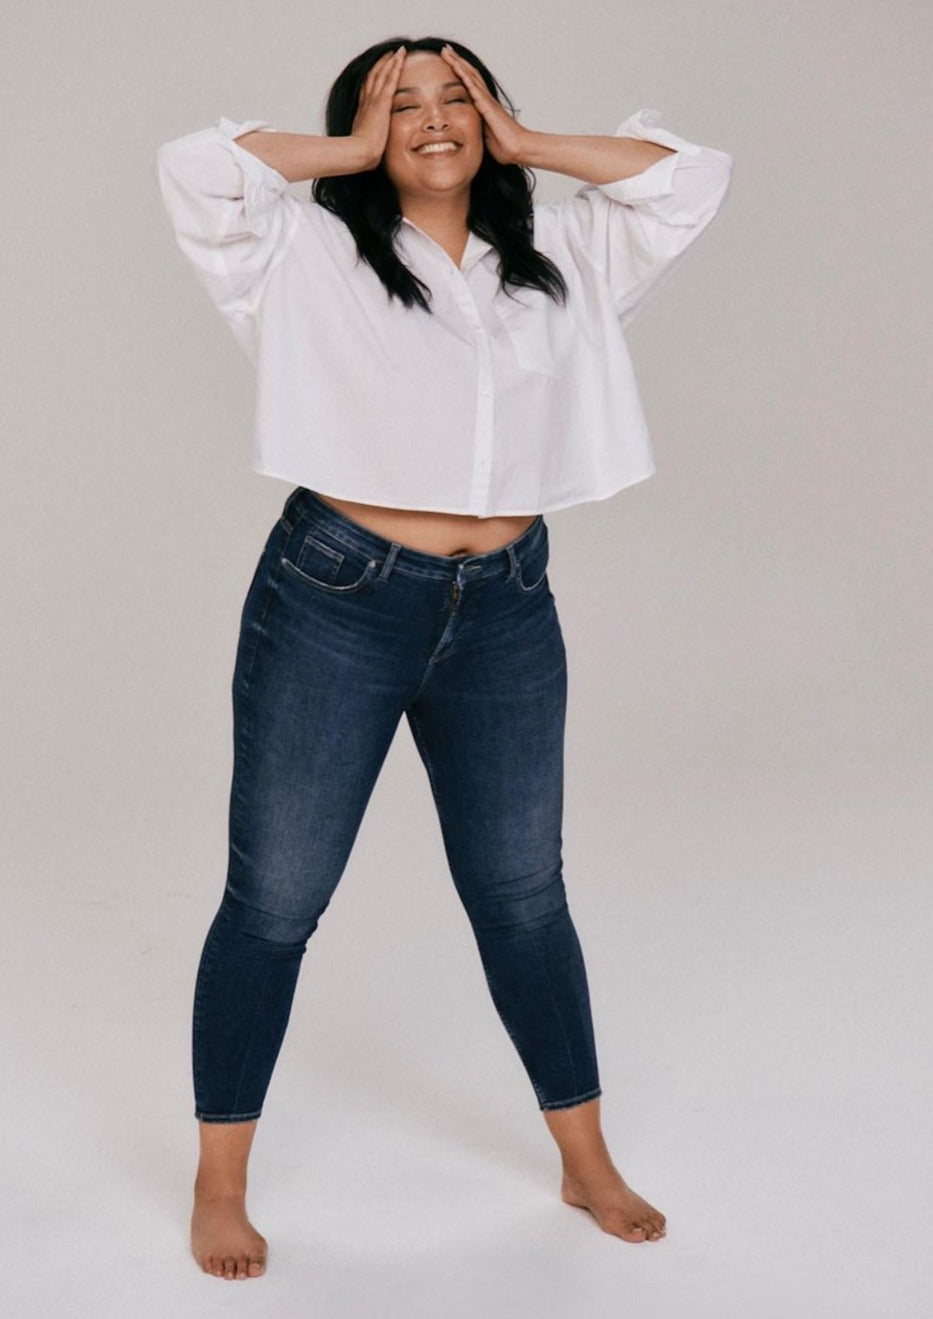 Flattering jeans on curvy body shapes by Silver Jeans Canada